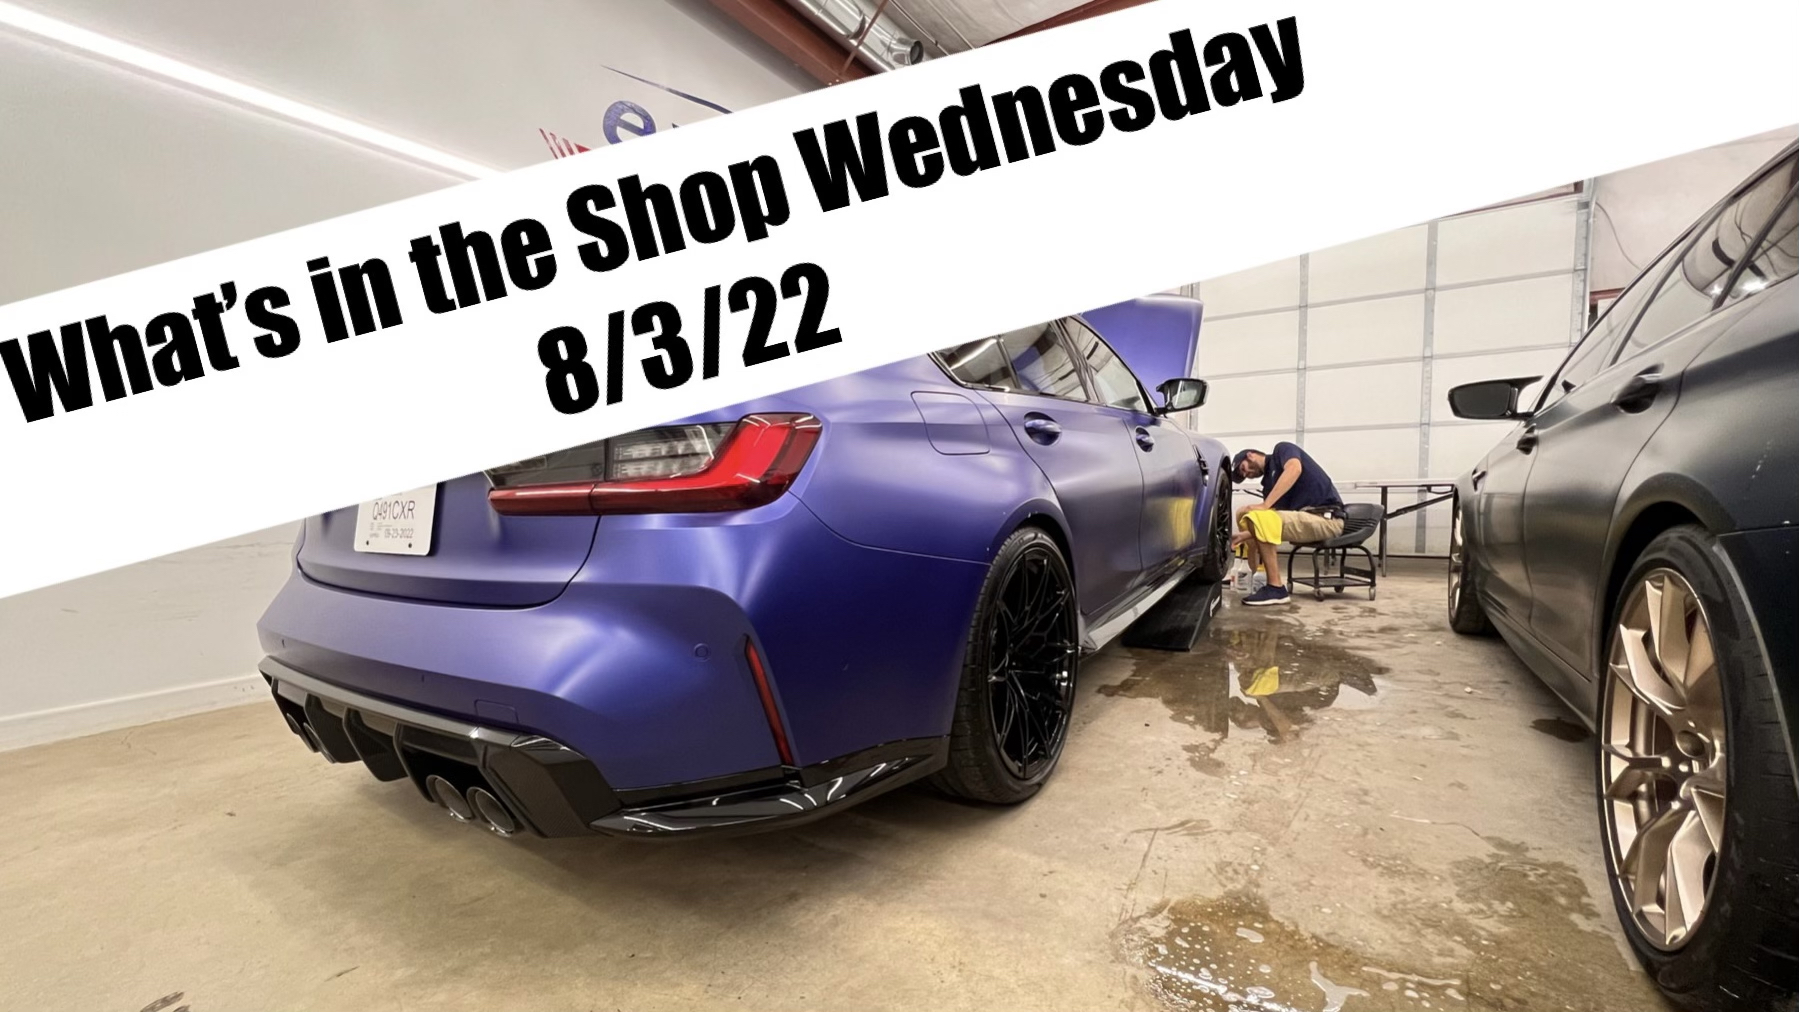 What’s in the Shop Wednesday 8/3/22